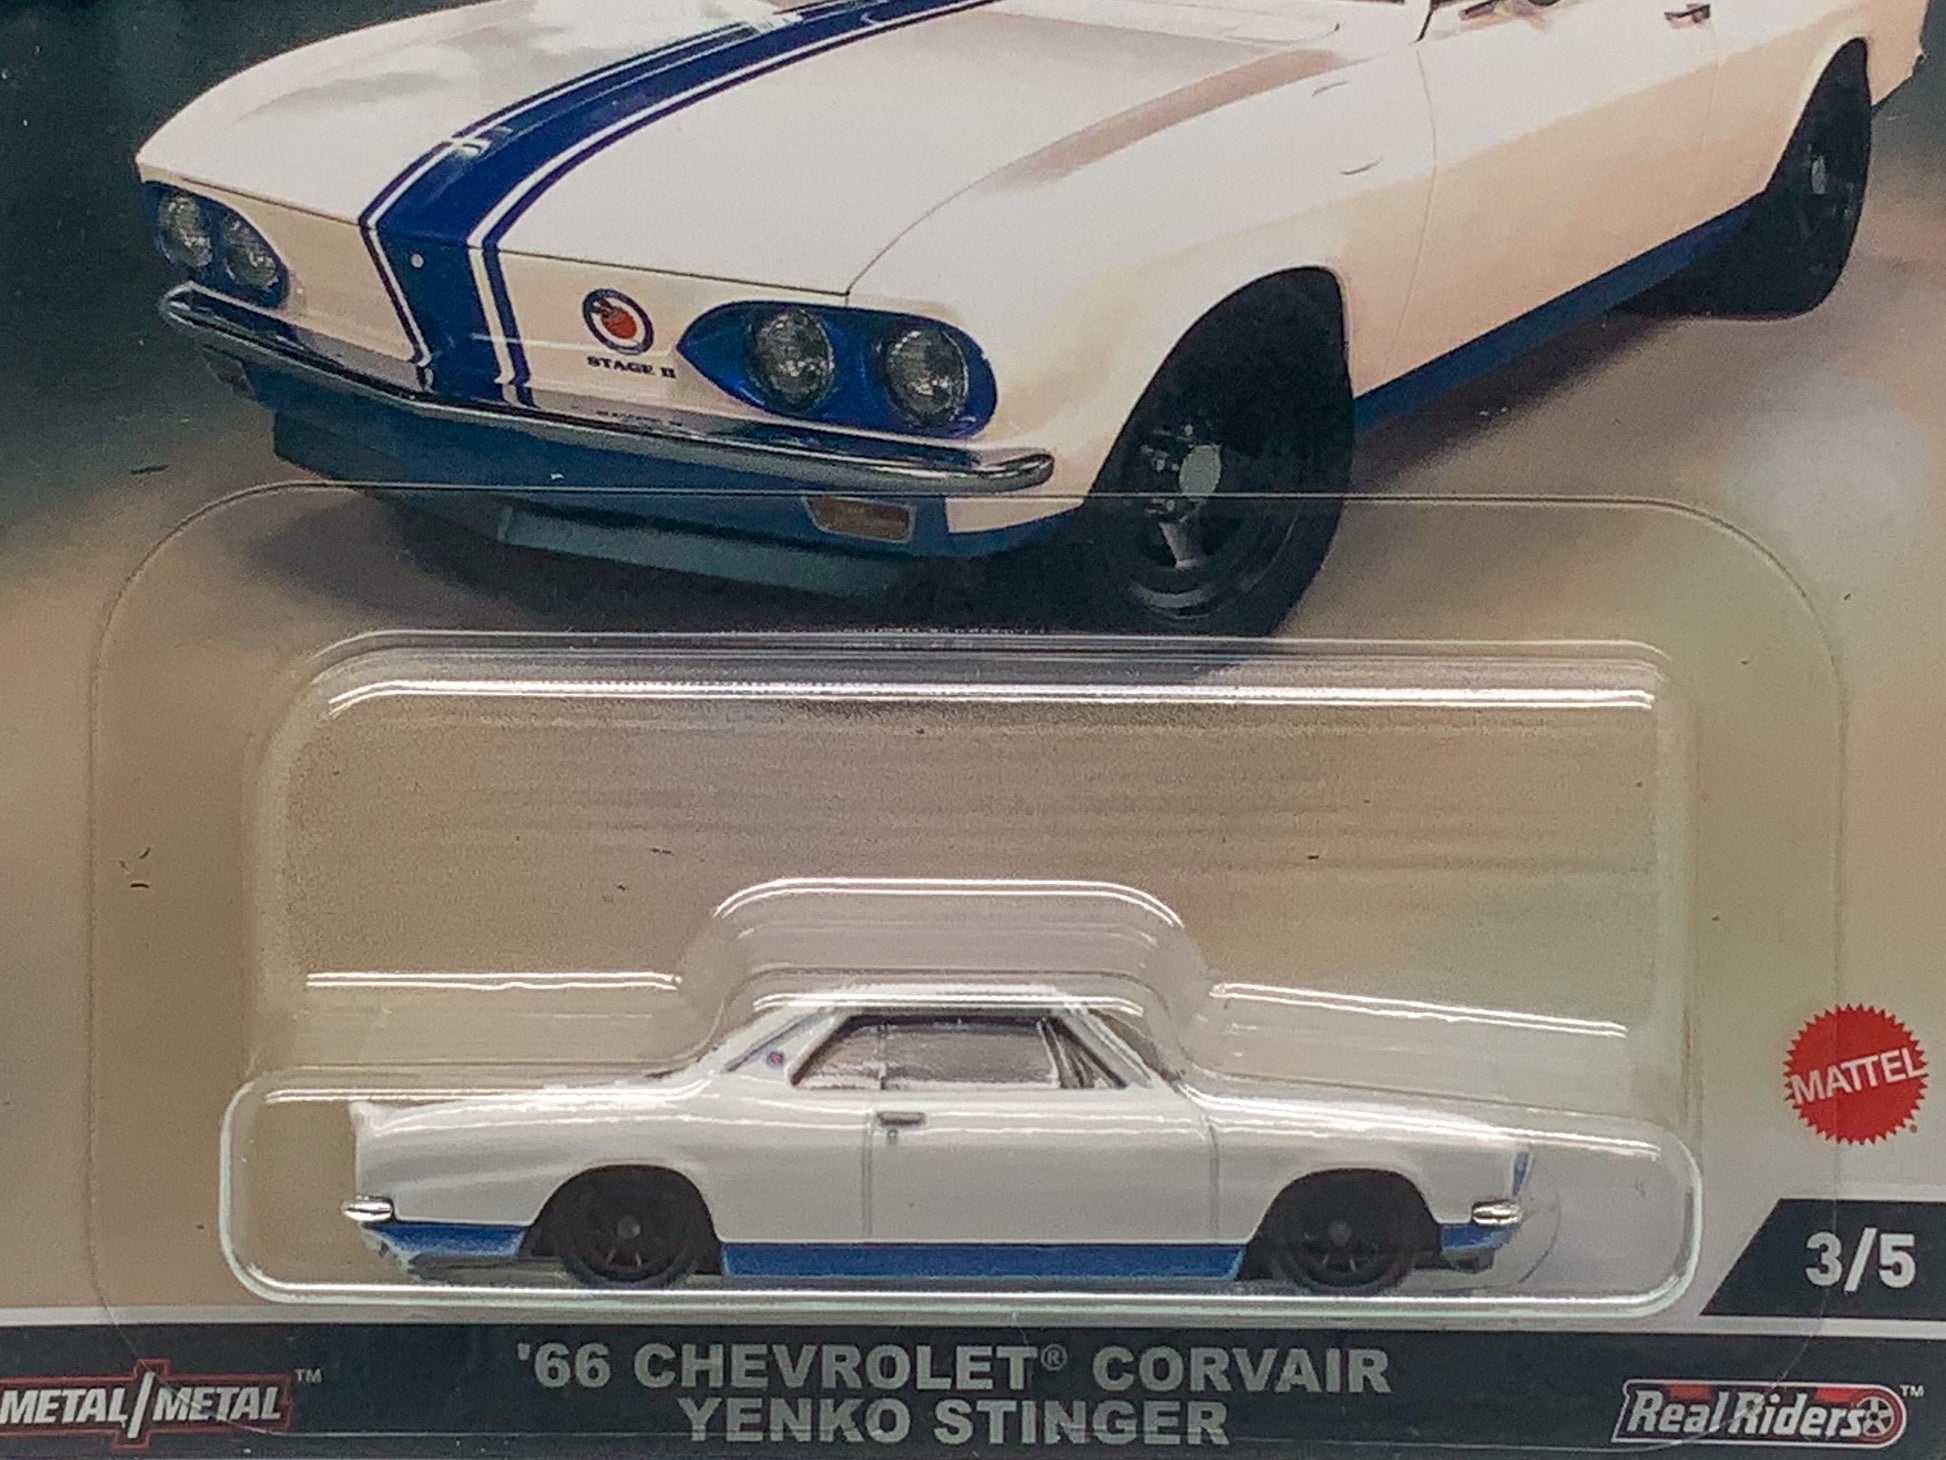 Buy at Tatoyshop.com Hot Wheels Car Culture  '66 Chevrolet Corvair Yenko Stinger 3/5  Number 1 from the set of 5 Jay Leno’s Garage Series Premium Real Riders Metal Mattel FPY86 Shop Now   Mr Toys Kmart Target Big W 